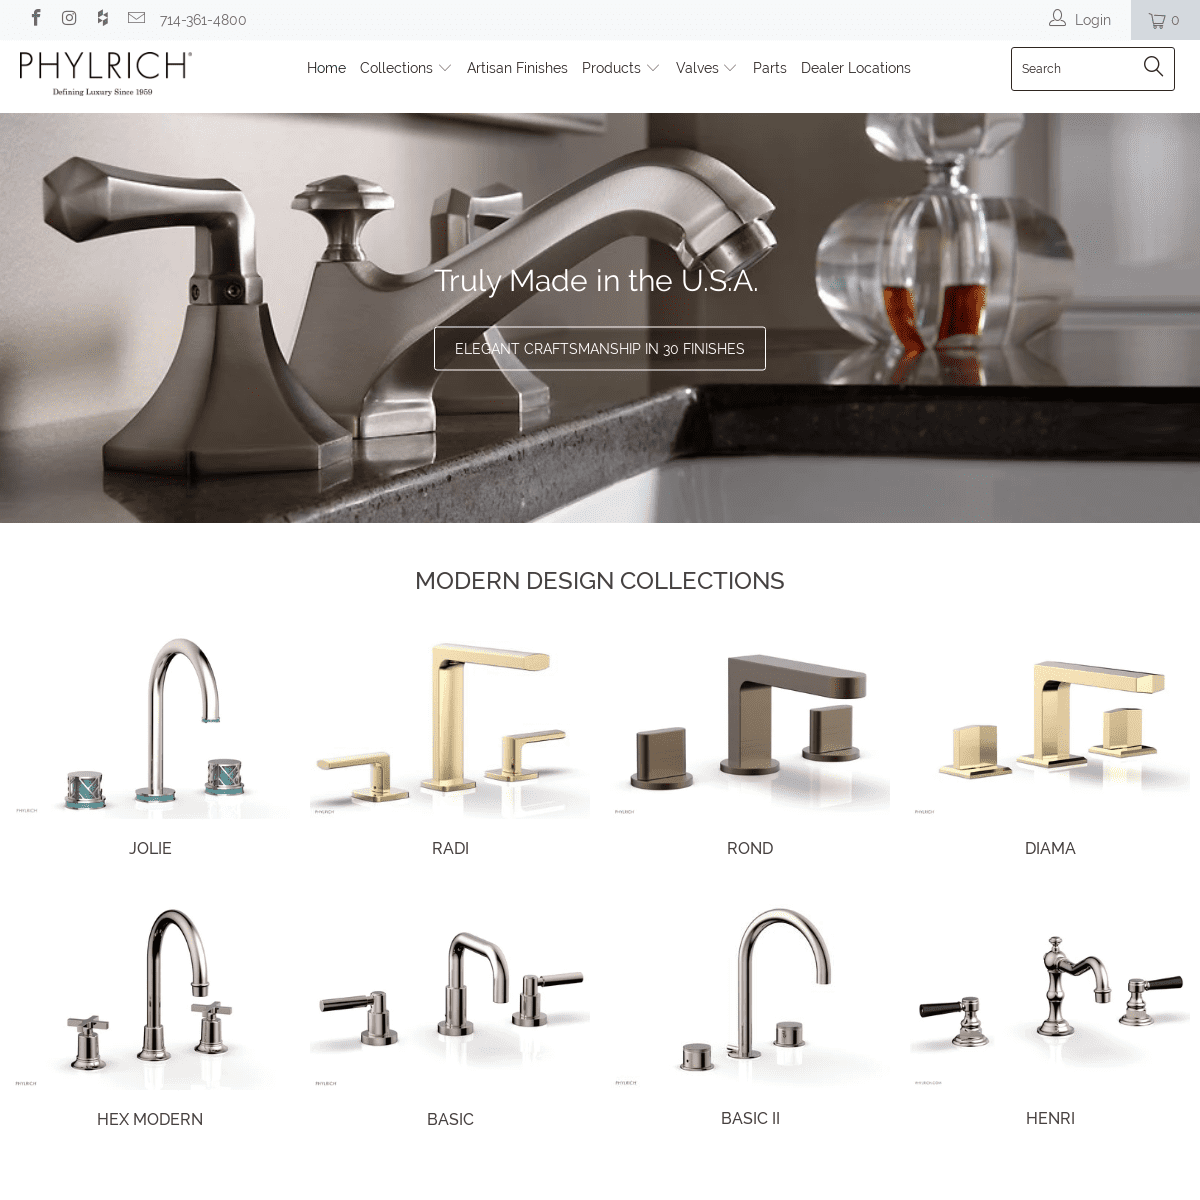 PHYLRICH - Luxurious Bathroom Faucets & Fixtures